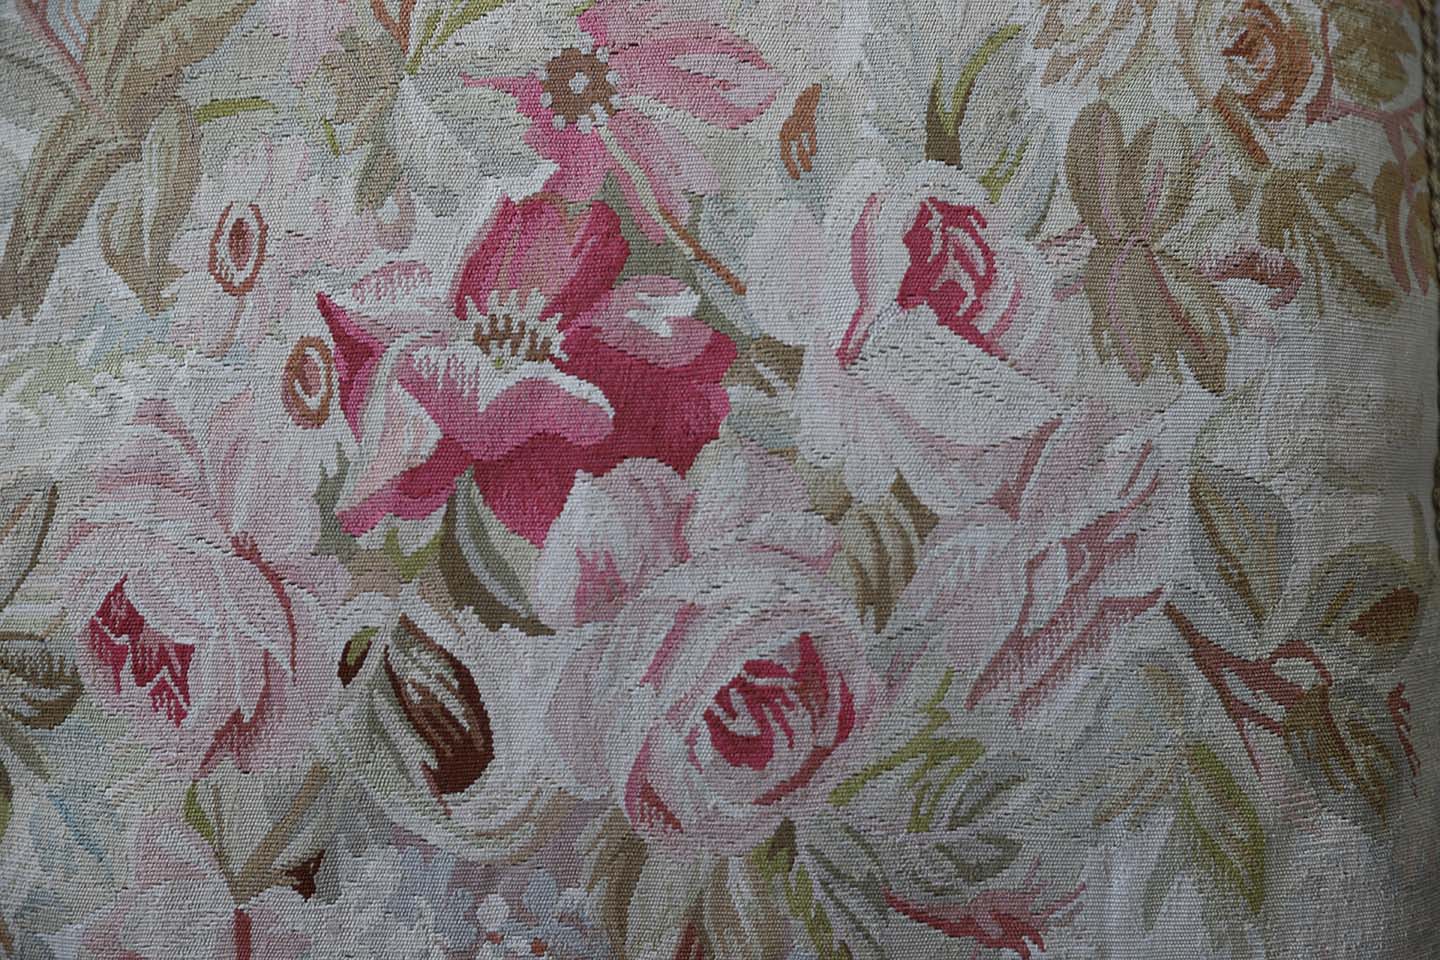 20"x20" Very Fine Quality Hand Woven Silk Aubusson Pillow Case